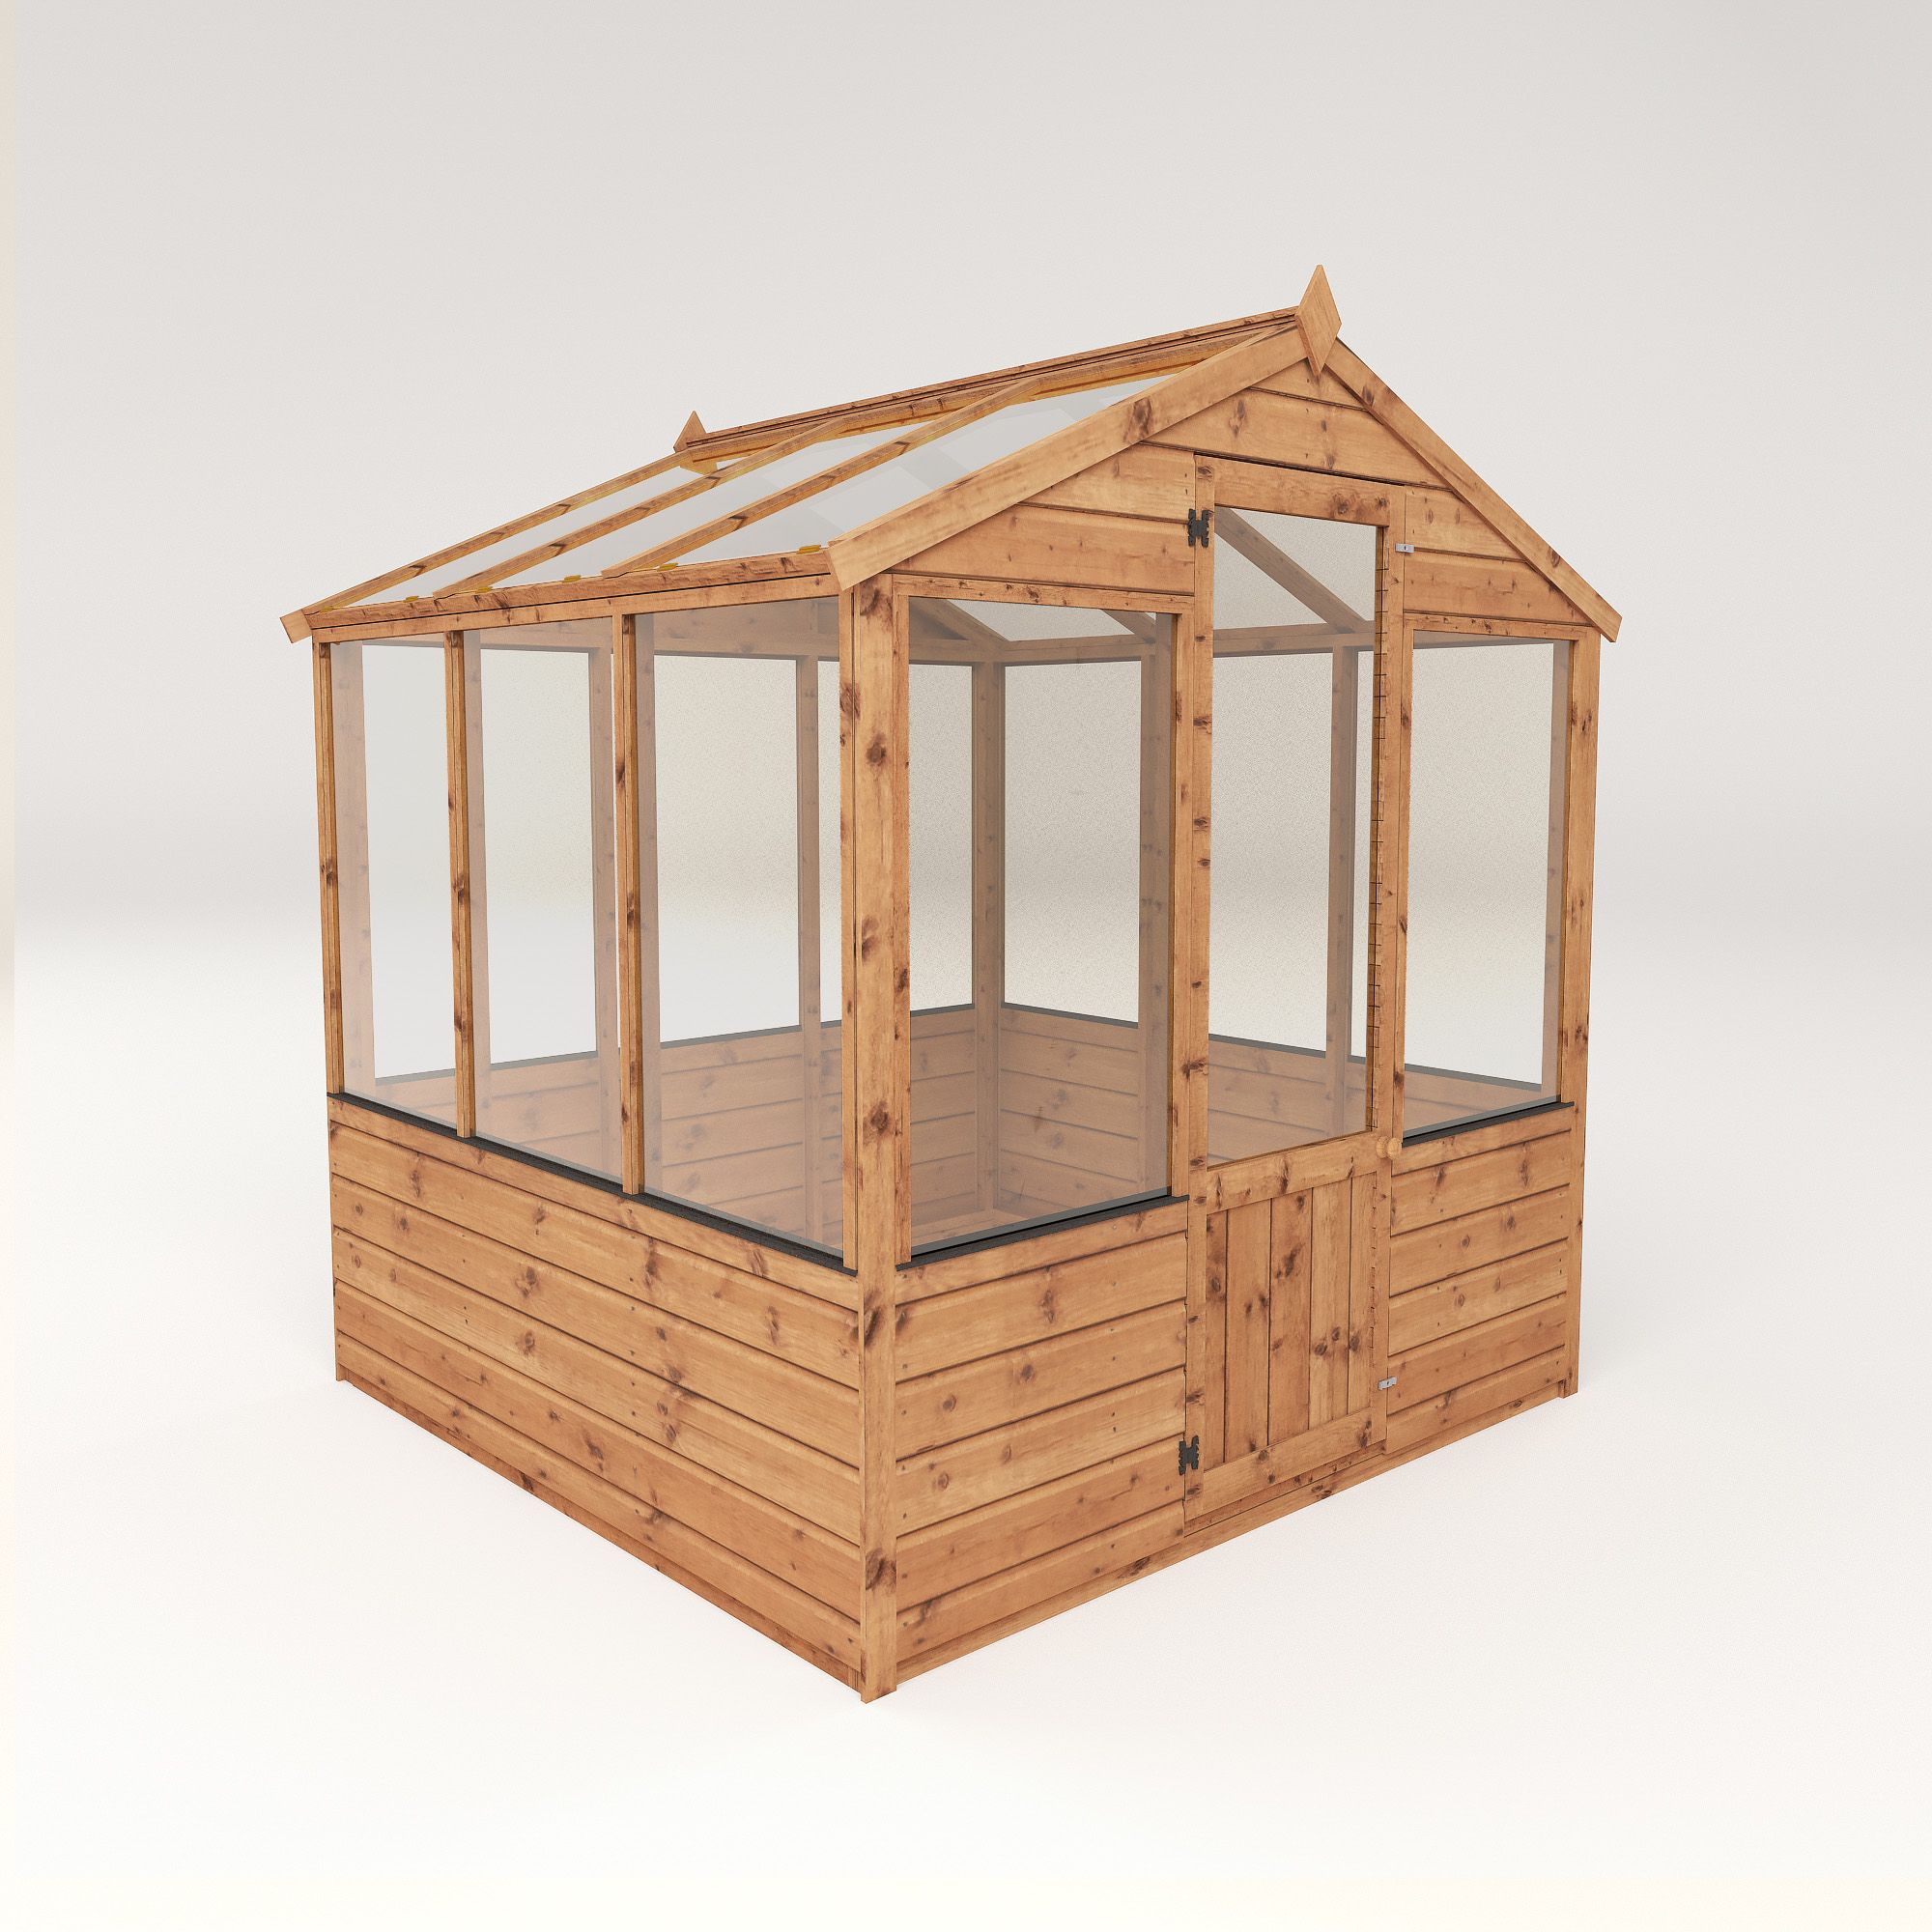 Mercia 6x6 Greenhouse with Flap vent